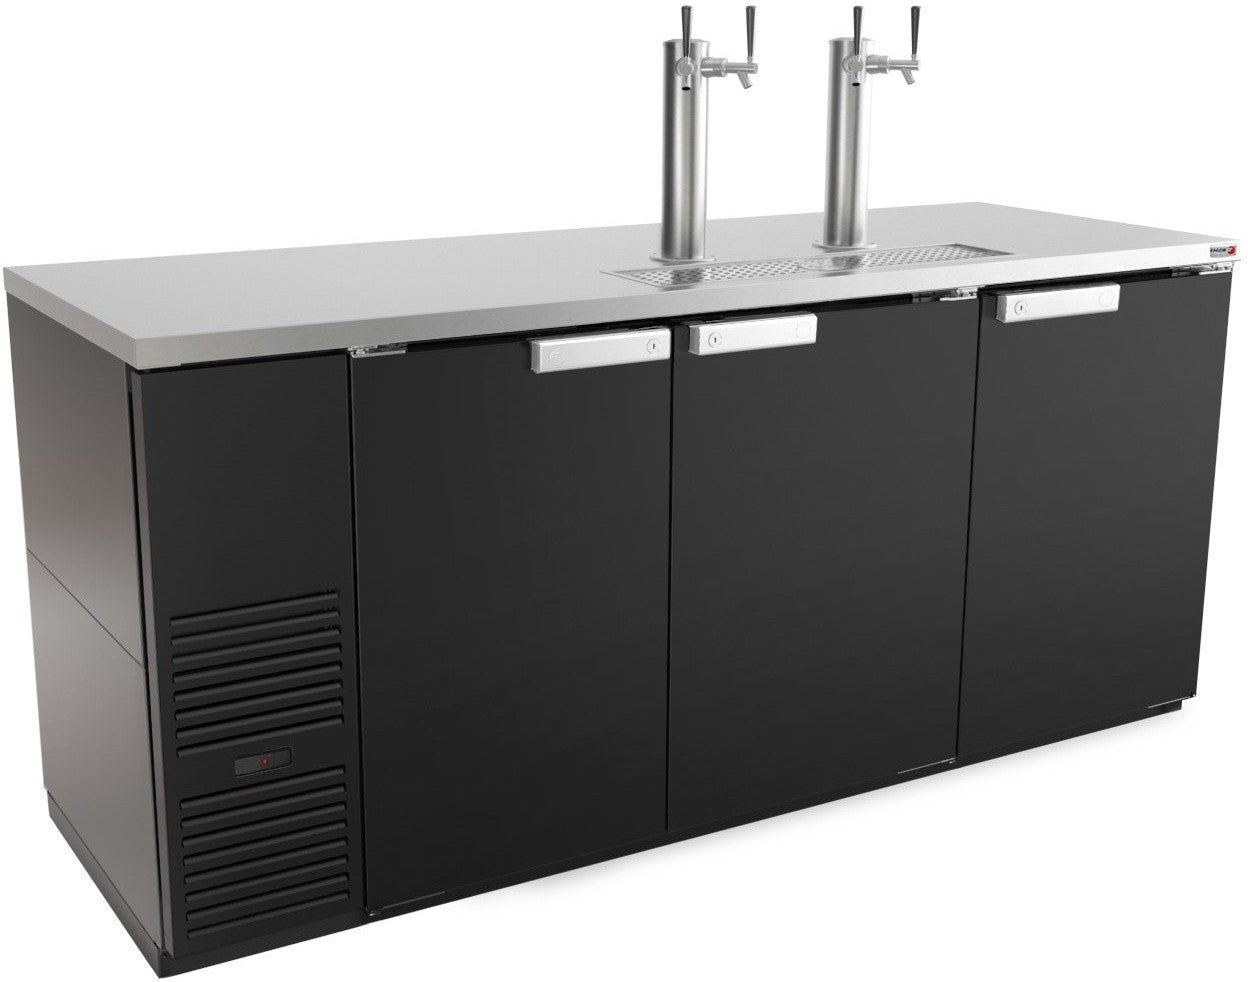 Fagor - FDD Series 115 V, 80" Black Vinyl Finish Three Door Direct Draw Beer Cooler with 2 Towers & 4 Taps - FDD-79-N